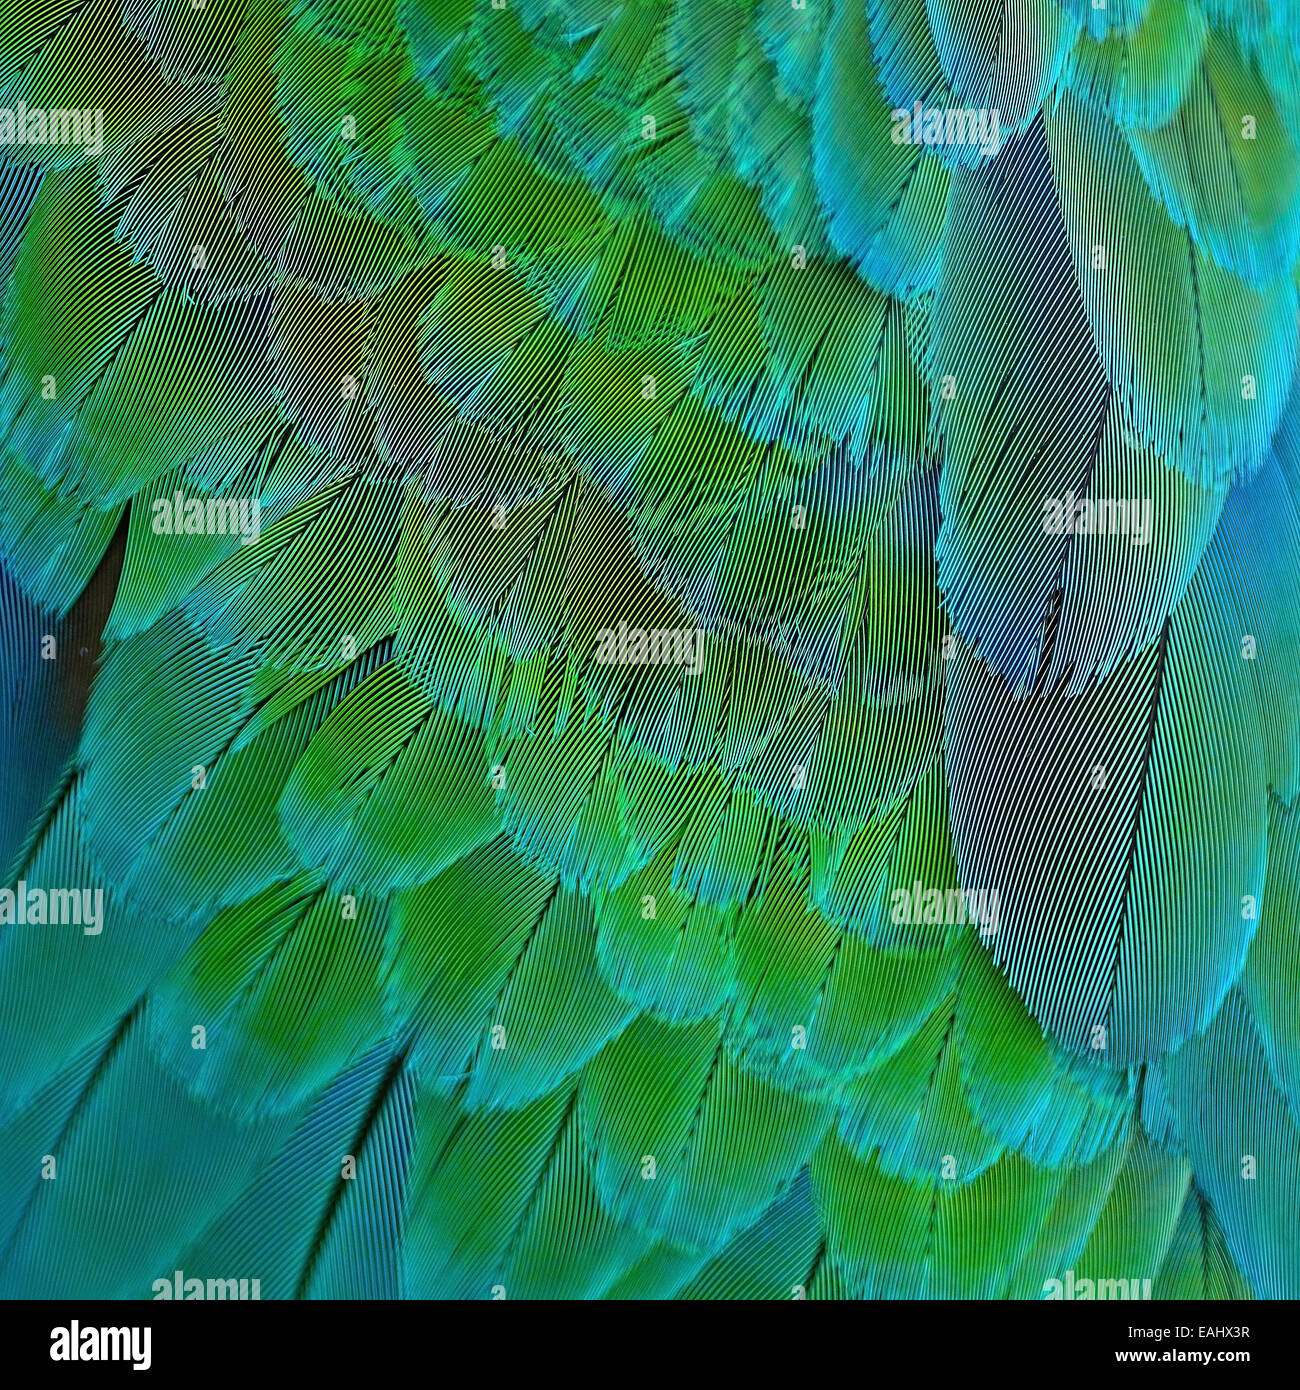 Beautiful green and blue bird feathers, Harlequin Macaw feathers Stock Photo